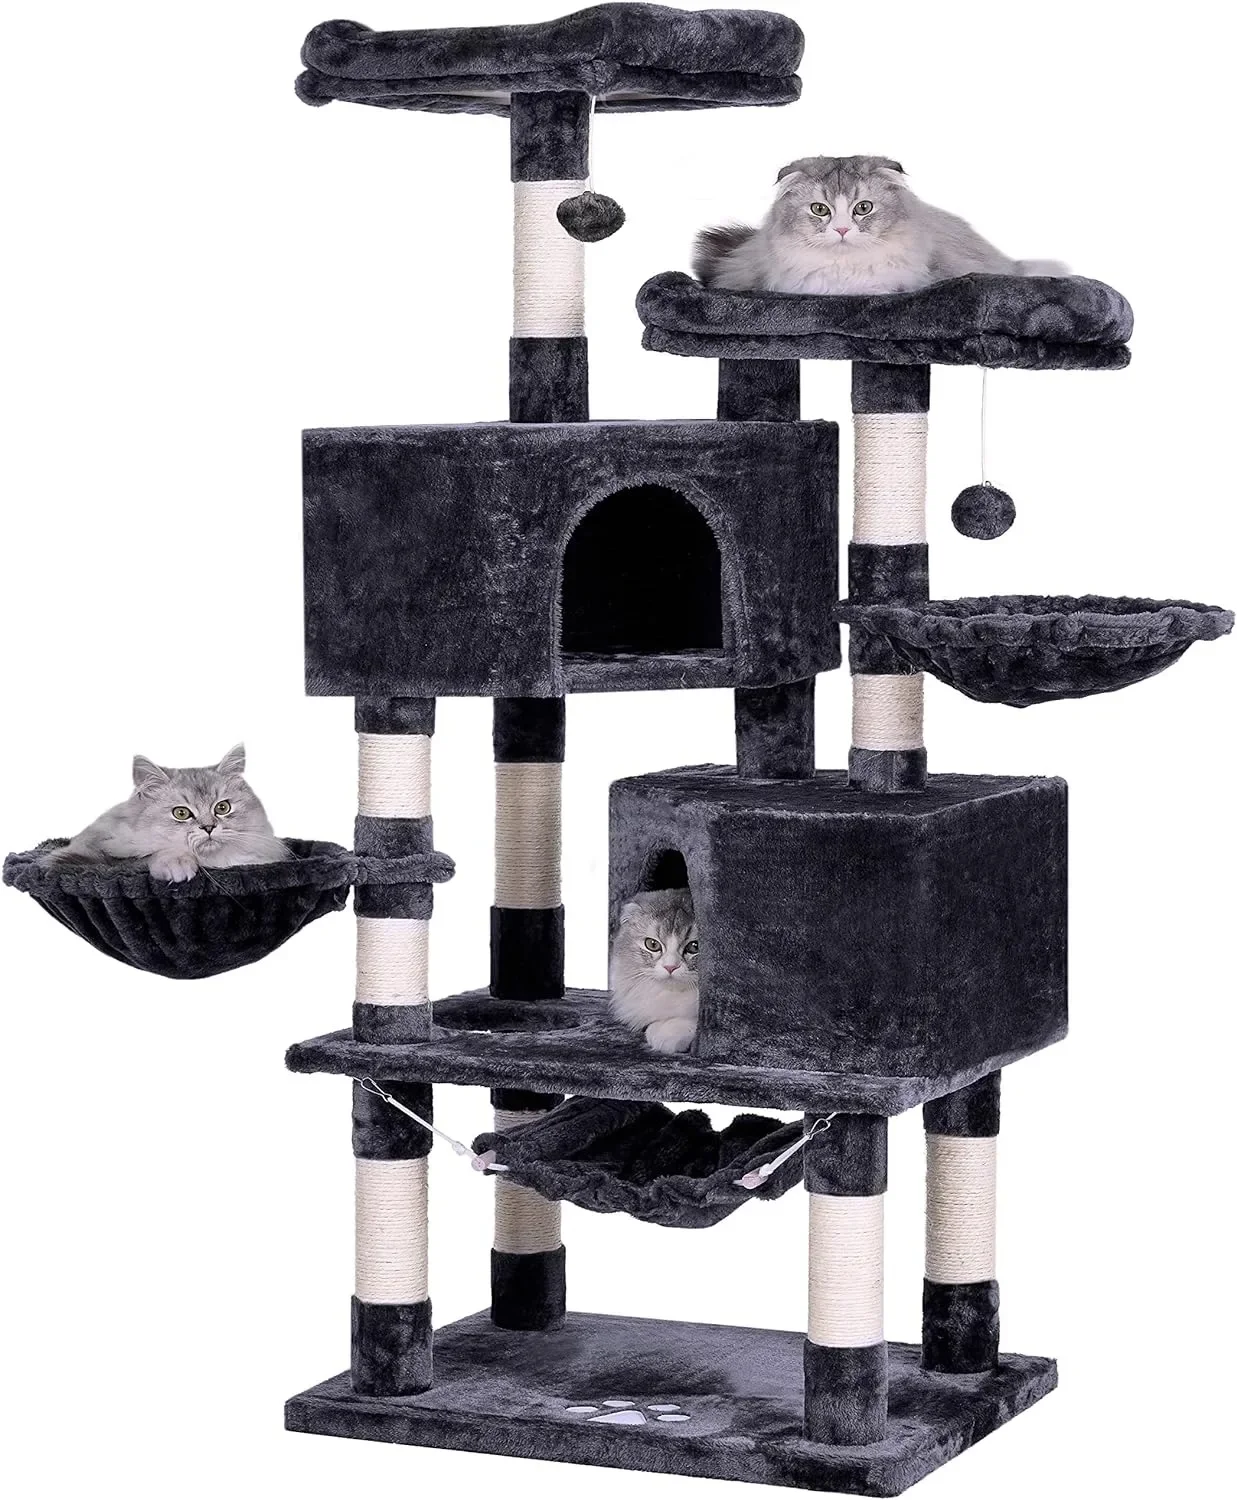 

Multi-Level Cat Tree Tower for Indoor Cats with Sisal Scratching Posts, Cat Condo Furniture for Large Cats Kitty Activity